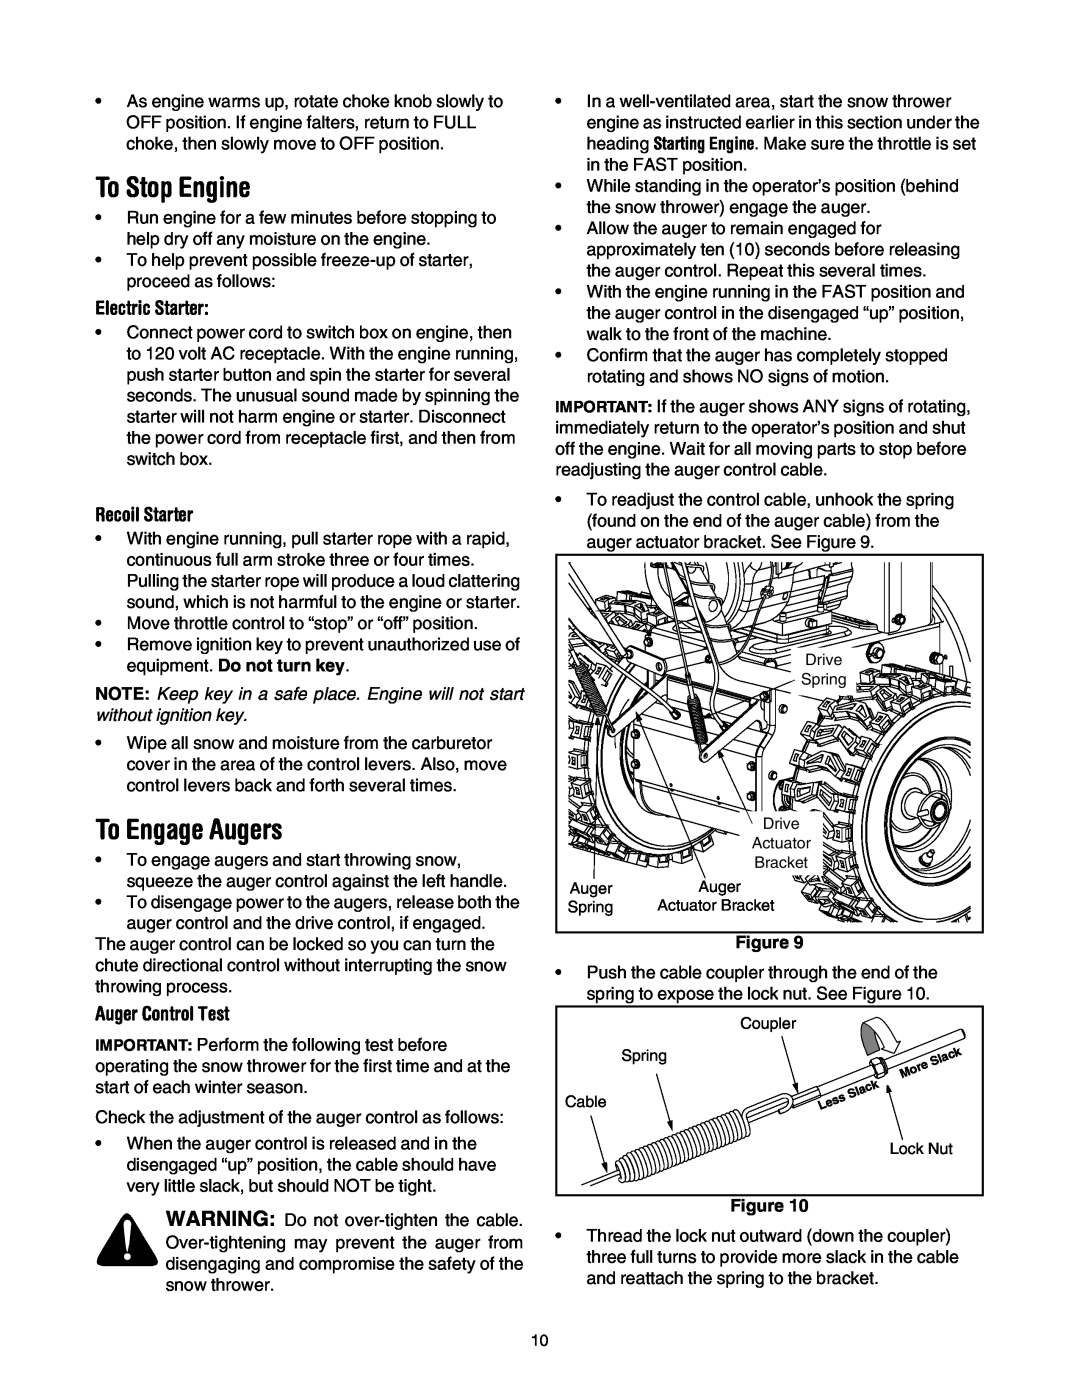 Troy-Bilt 10530 manual To Stop Engine, To Engage Augers, Auger Control Test, Electric Starter, Recoil Starter 